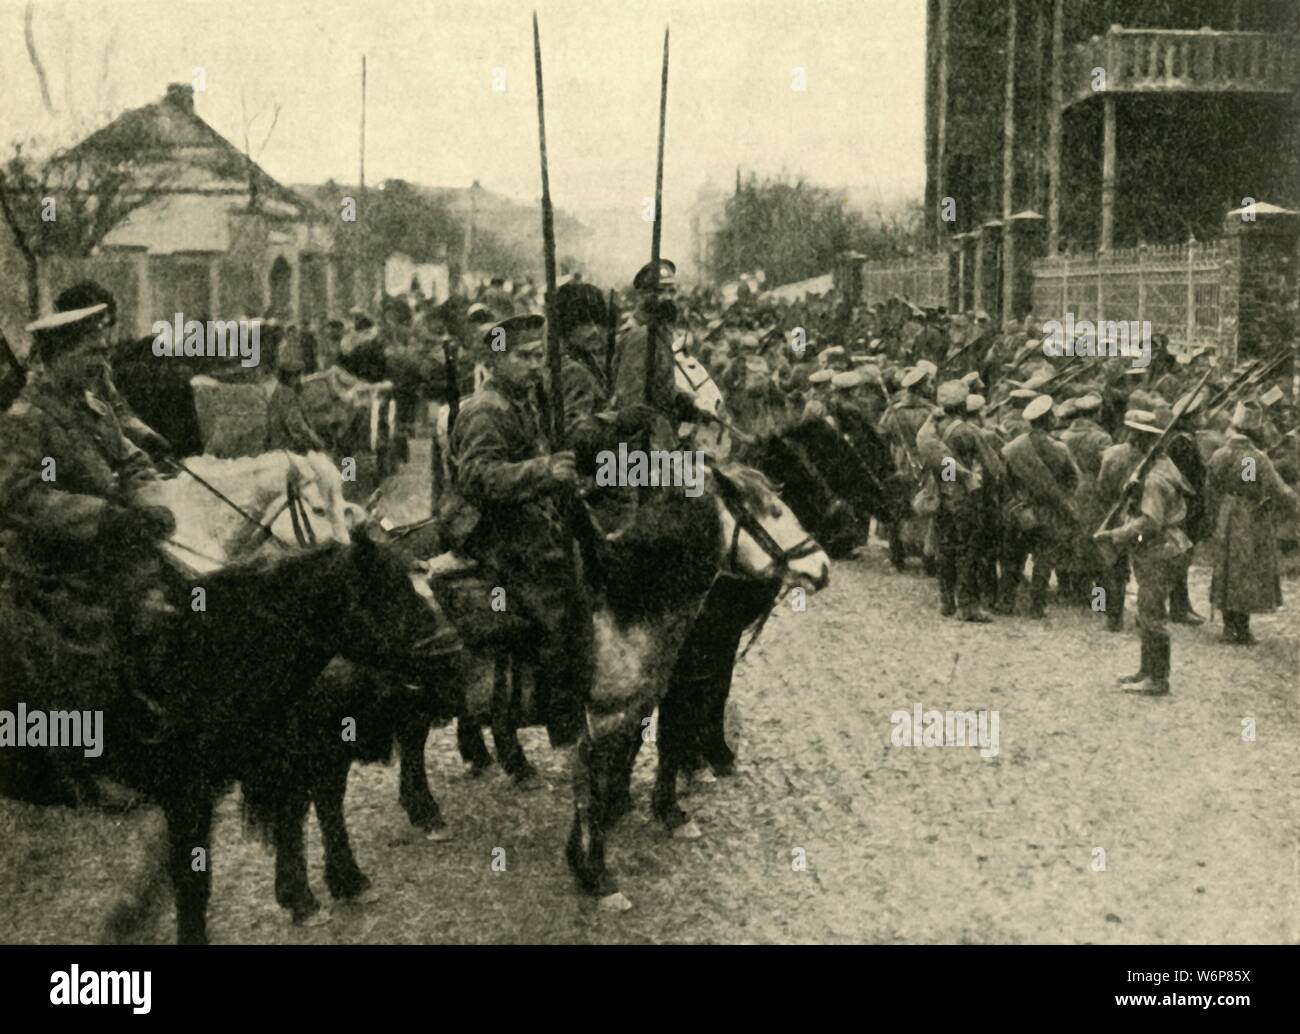 Cossack soldiers, First World War, 1914, (c1920). 'On the Heels of the Invader: a Cossack patrol occupying a Polish village. The German troops had been in occupation of this village only the night previous to the arrival of the Cossacks'. From &quot;The Great World War - A History&quot; Volume II, edited by Frank A Mumby. [The Gresham Publishing Company Ltd, London, c1920] Stock Photo